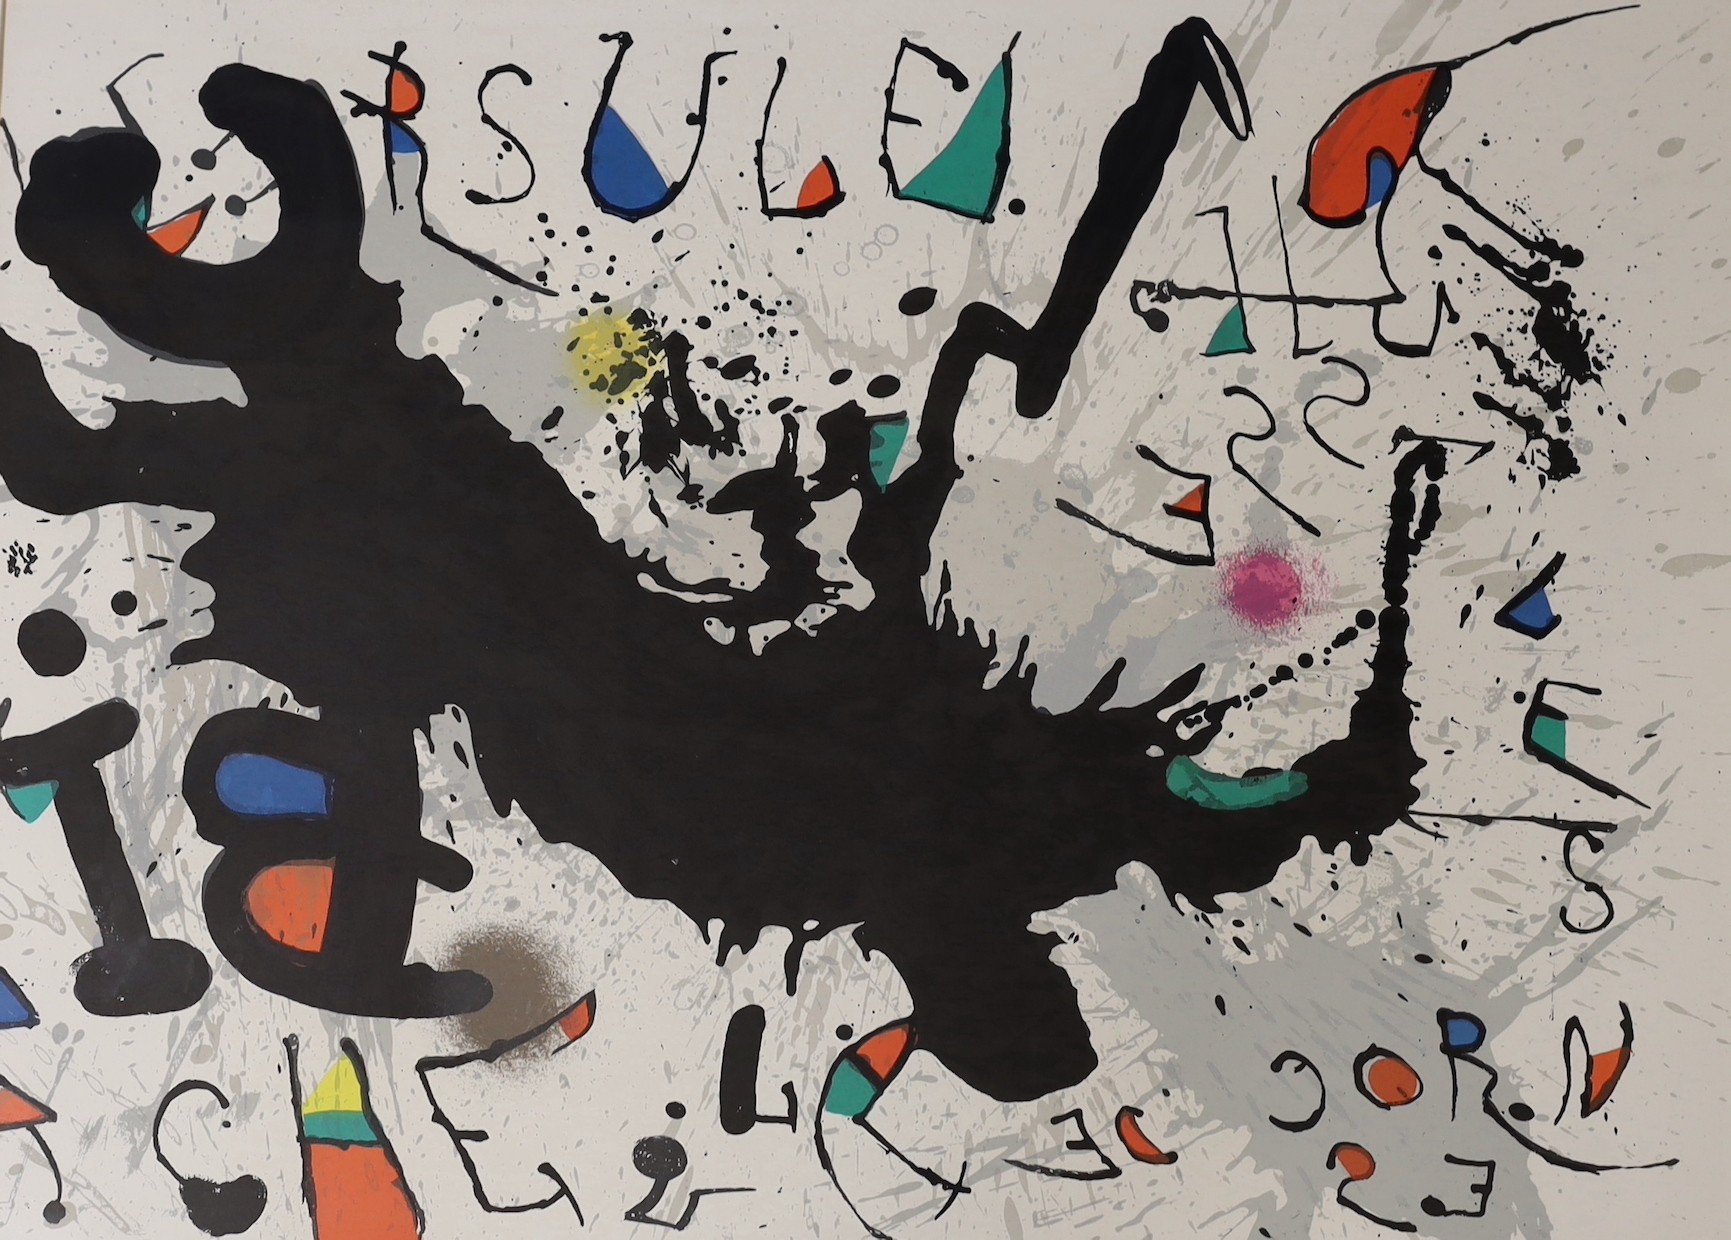 After Joan Miro (1893-1988), lithograph, Abstract published by Jean Amile 1978 from the edition of 500, 56 x 78cm and another lithograph after Picasso, 31 x 24cm